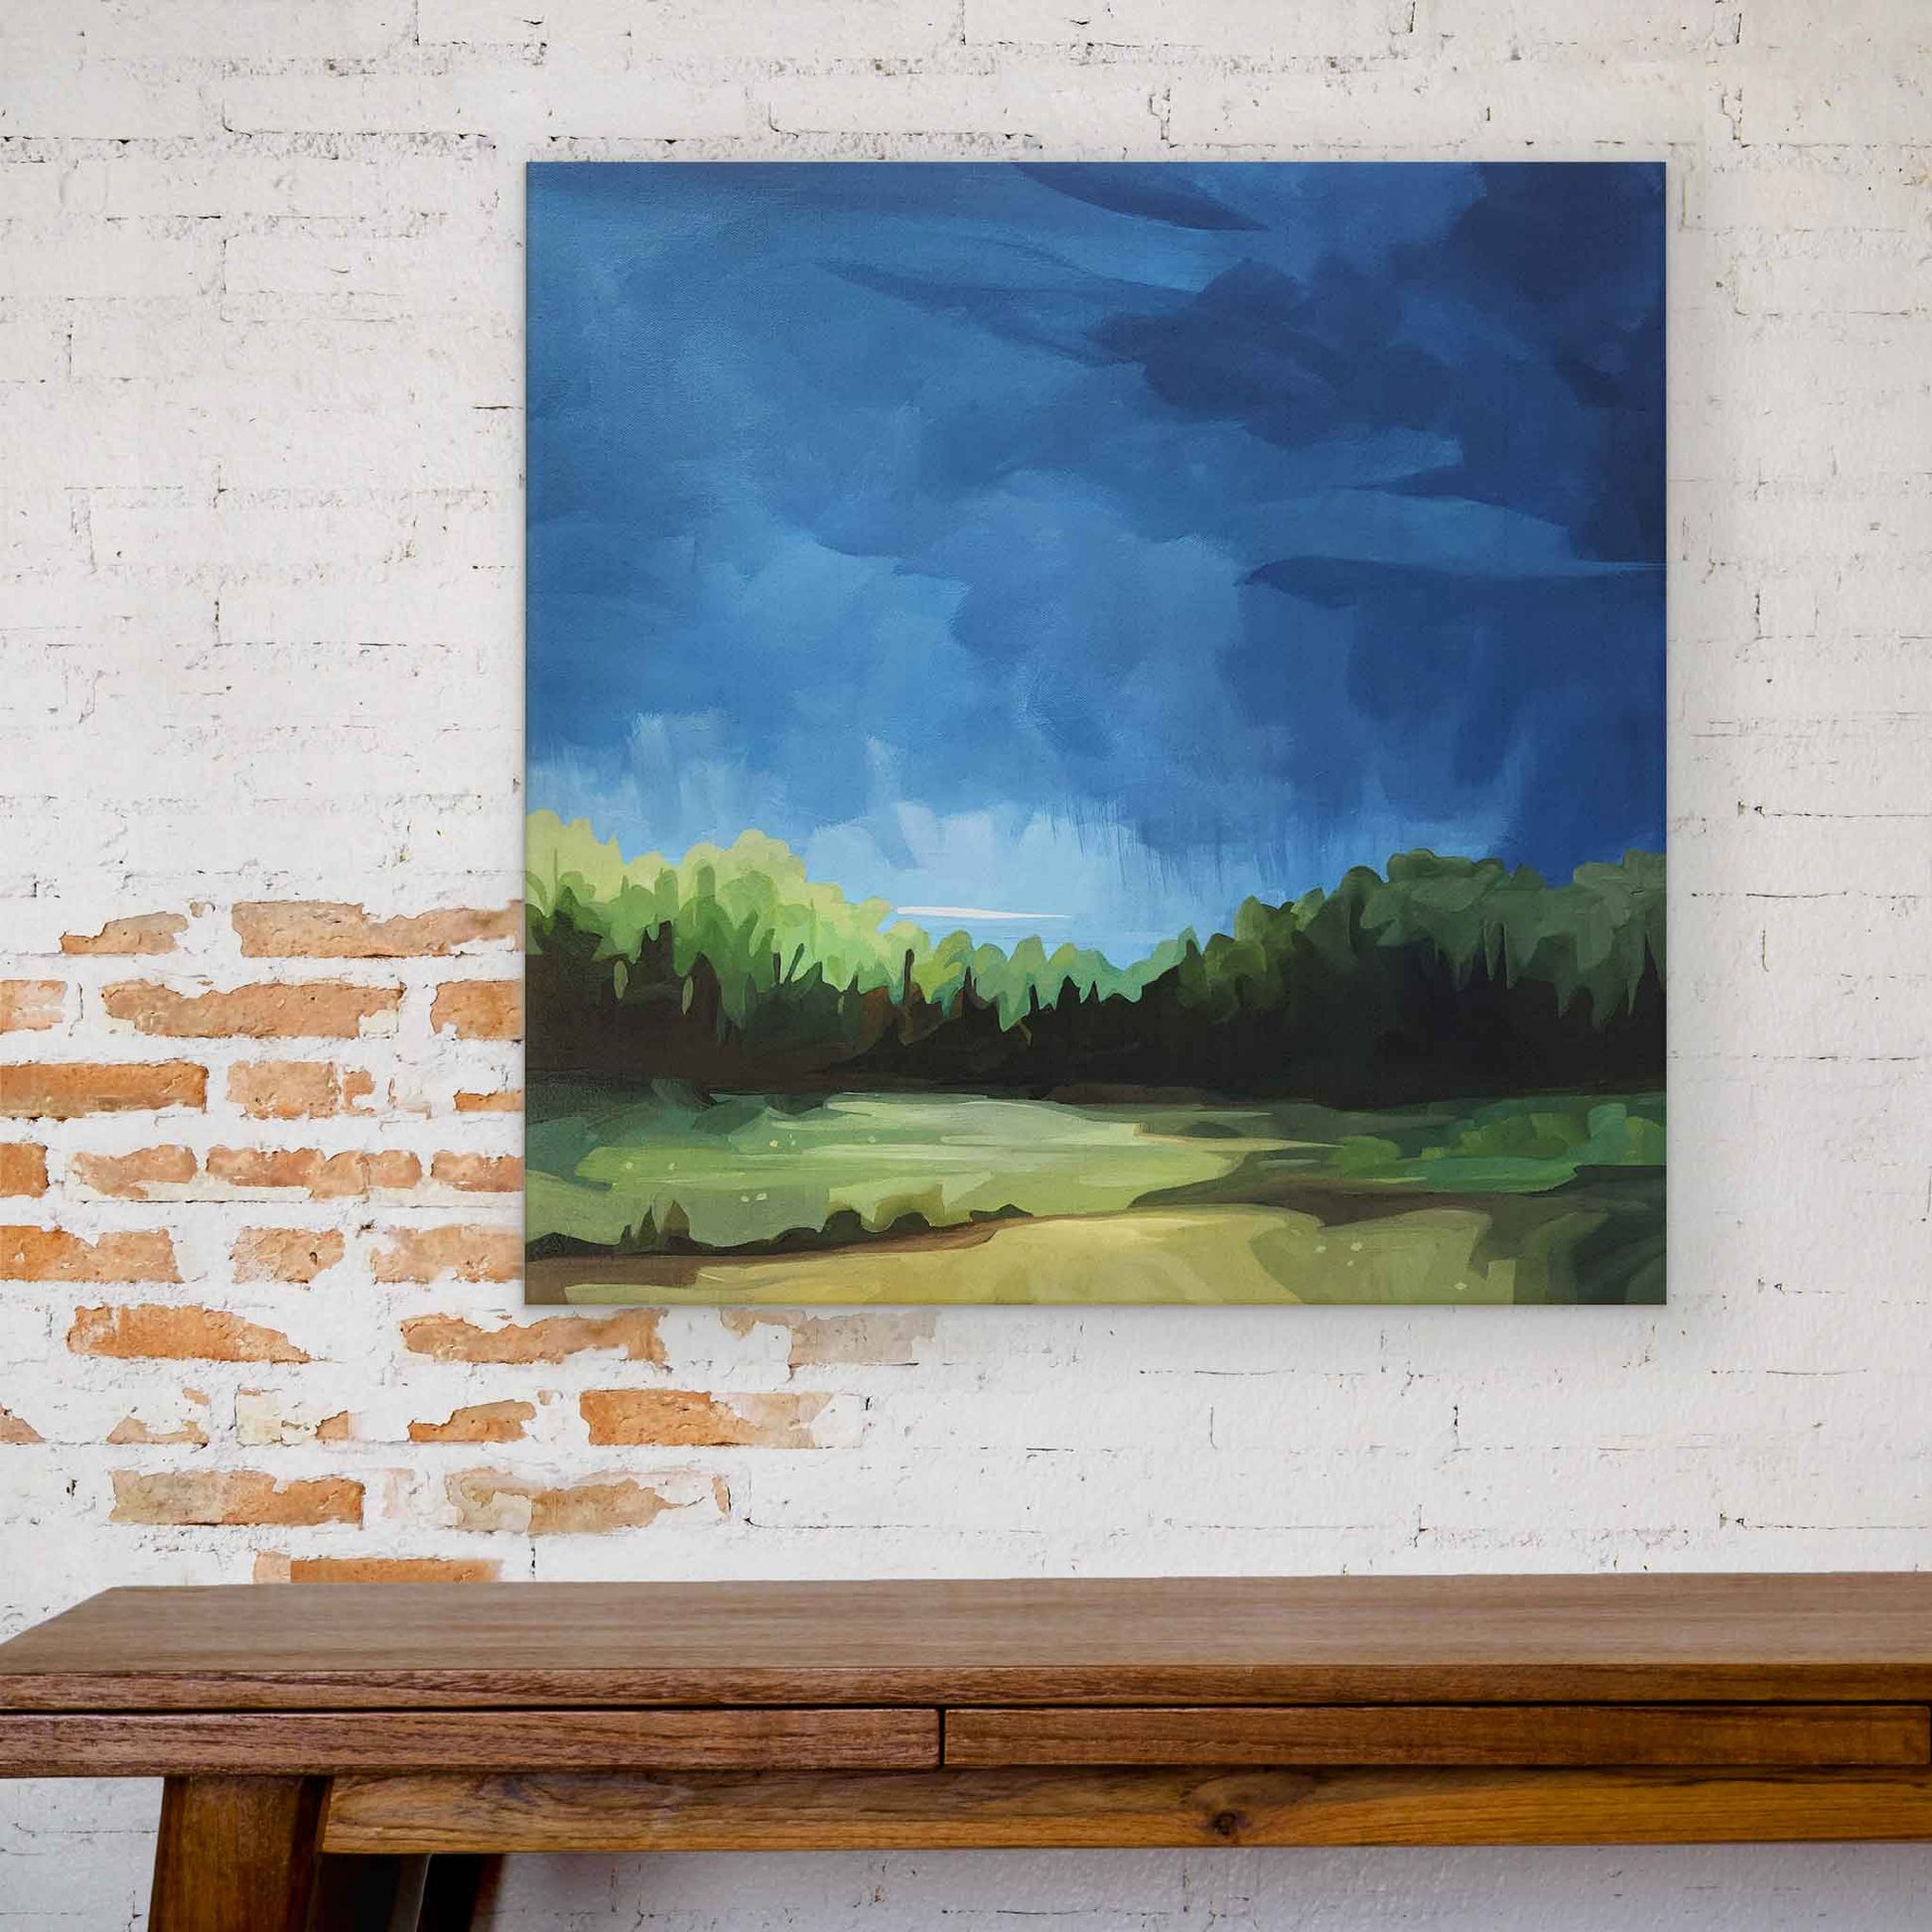 Acrylic landscape painting capturing the movement of a bright blue sky that contrasts with the fresh green of the forest landscape and fields below